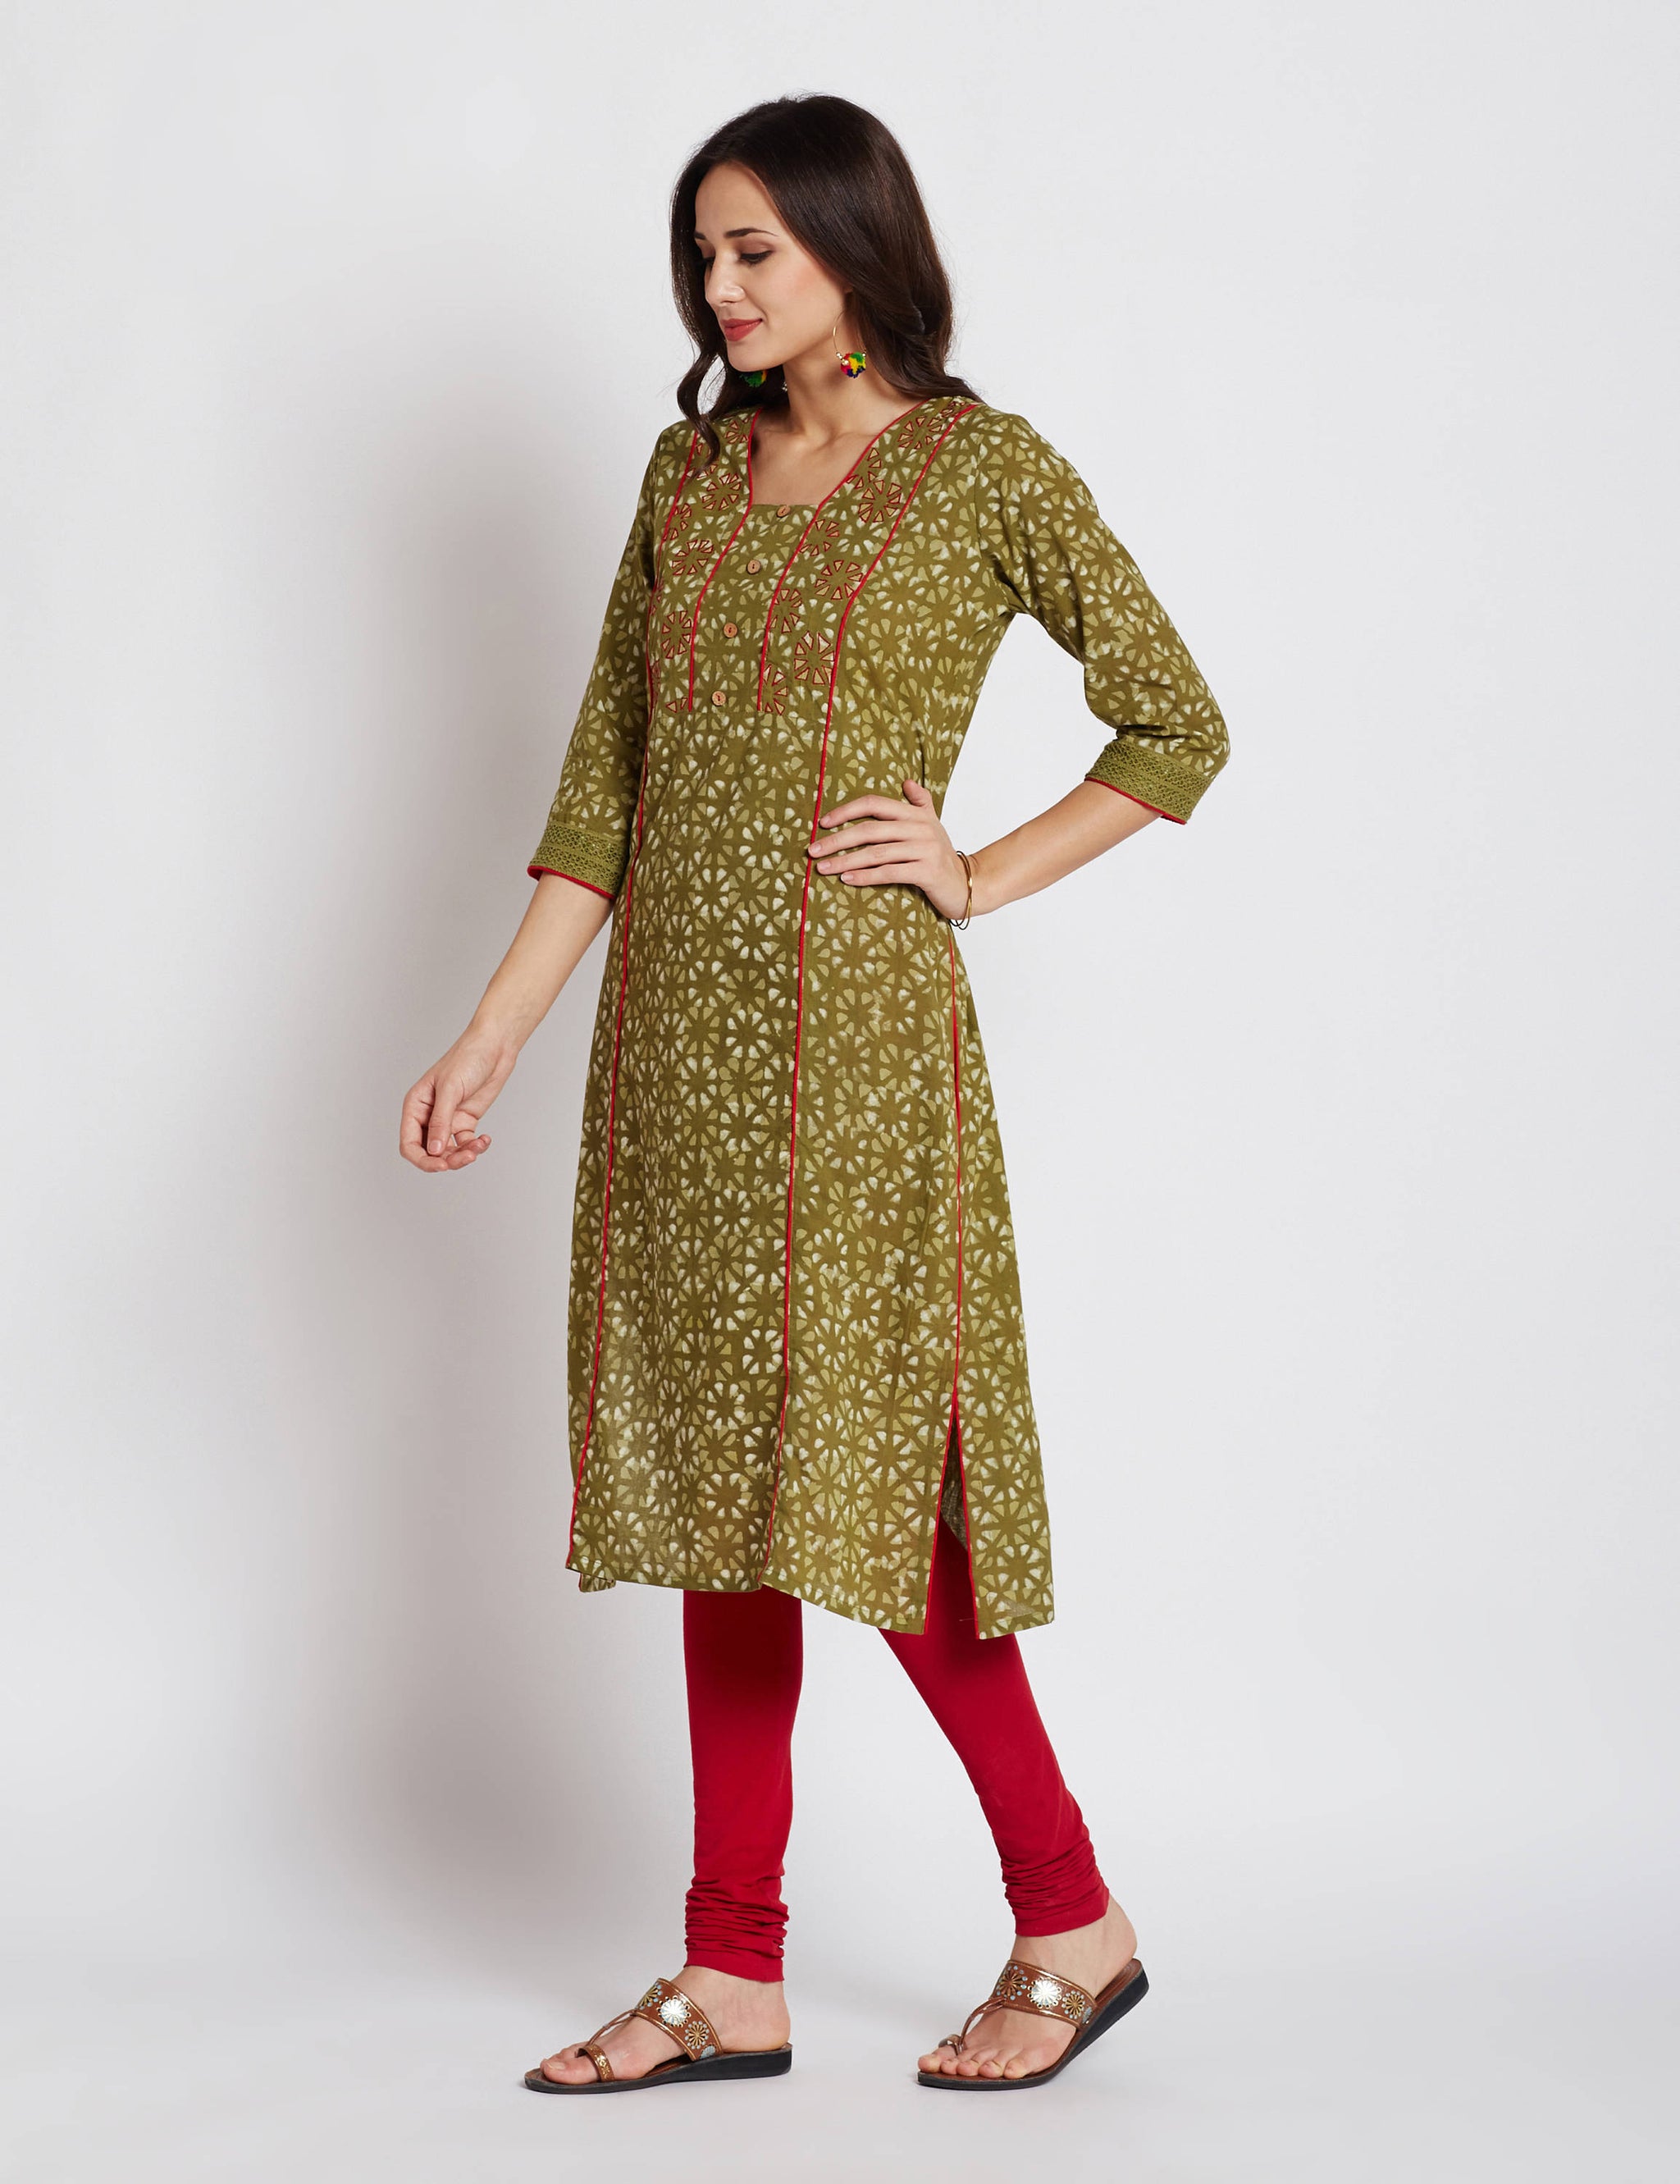 Hand block dabu printed ethnic long Indian kurta with trims on front and embroidery on neck